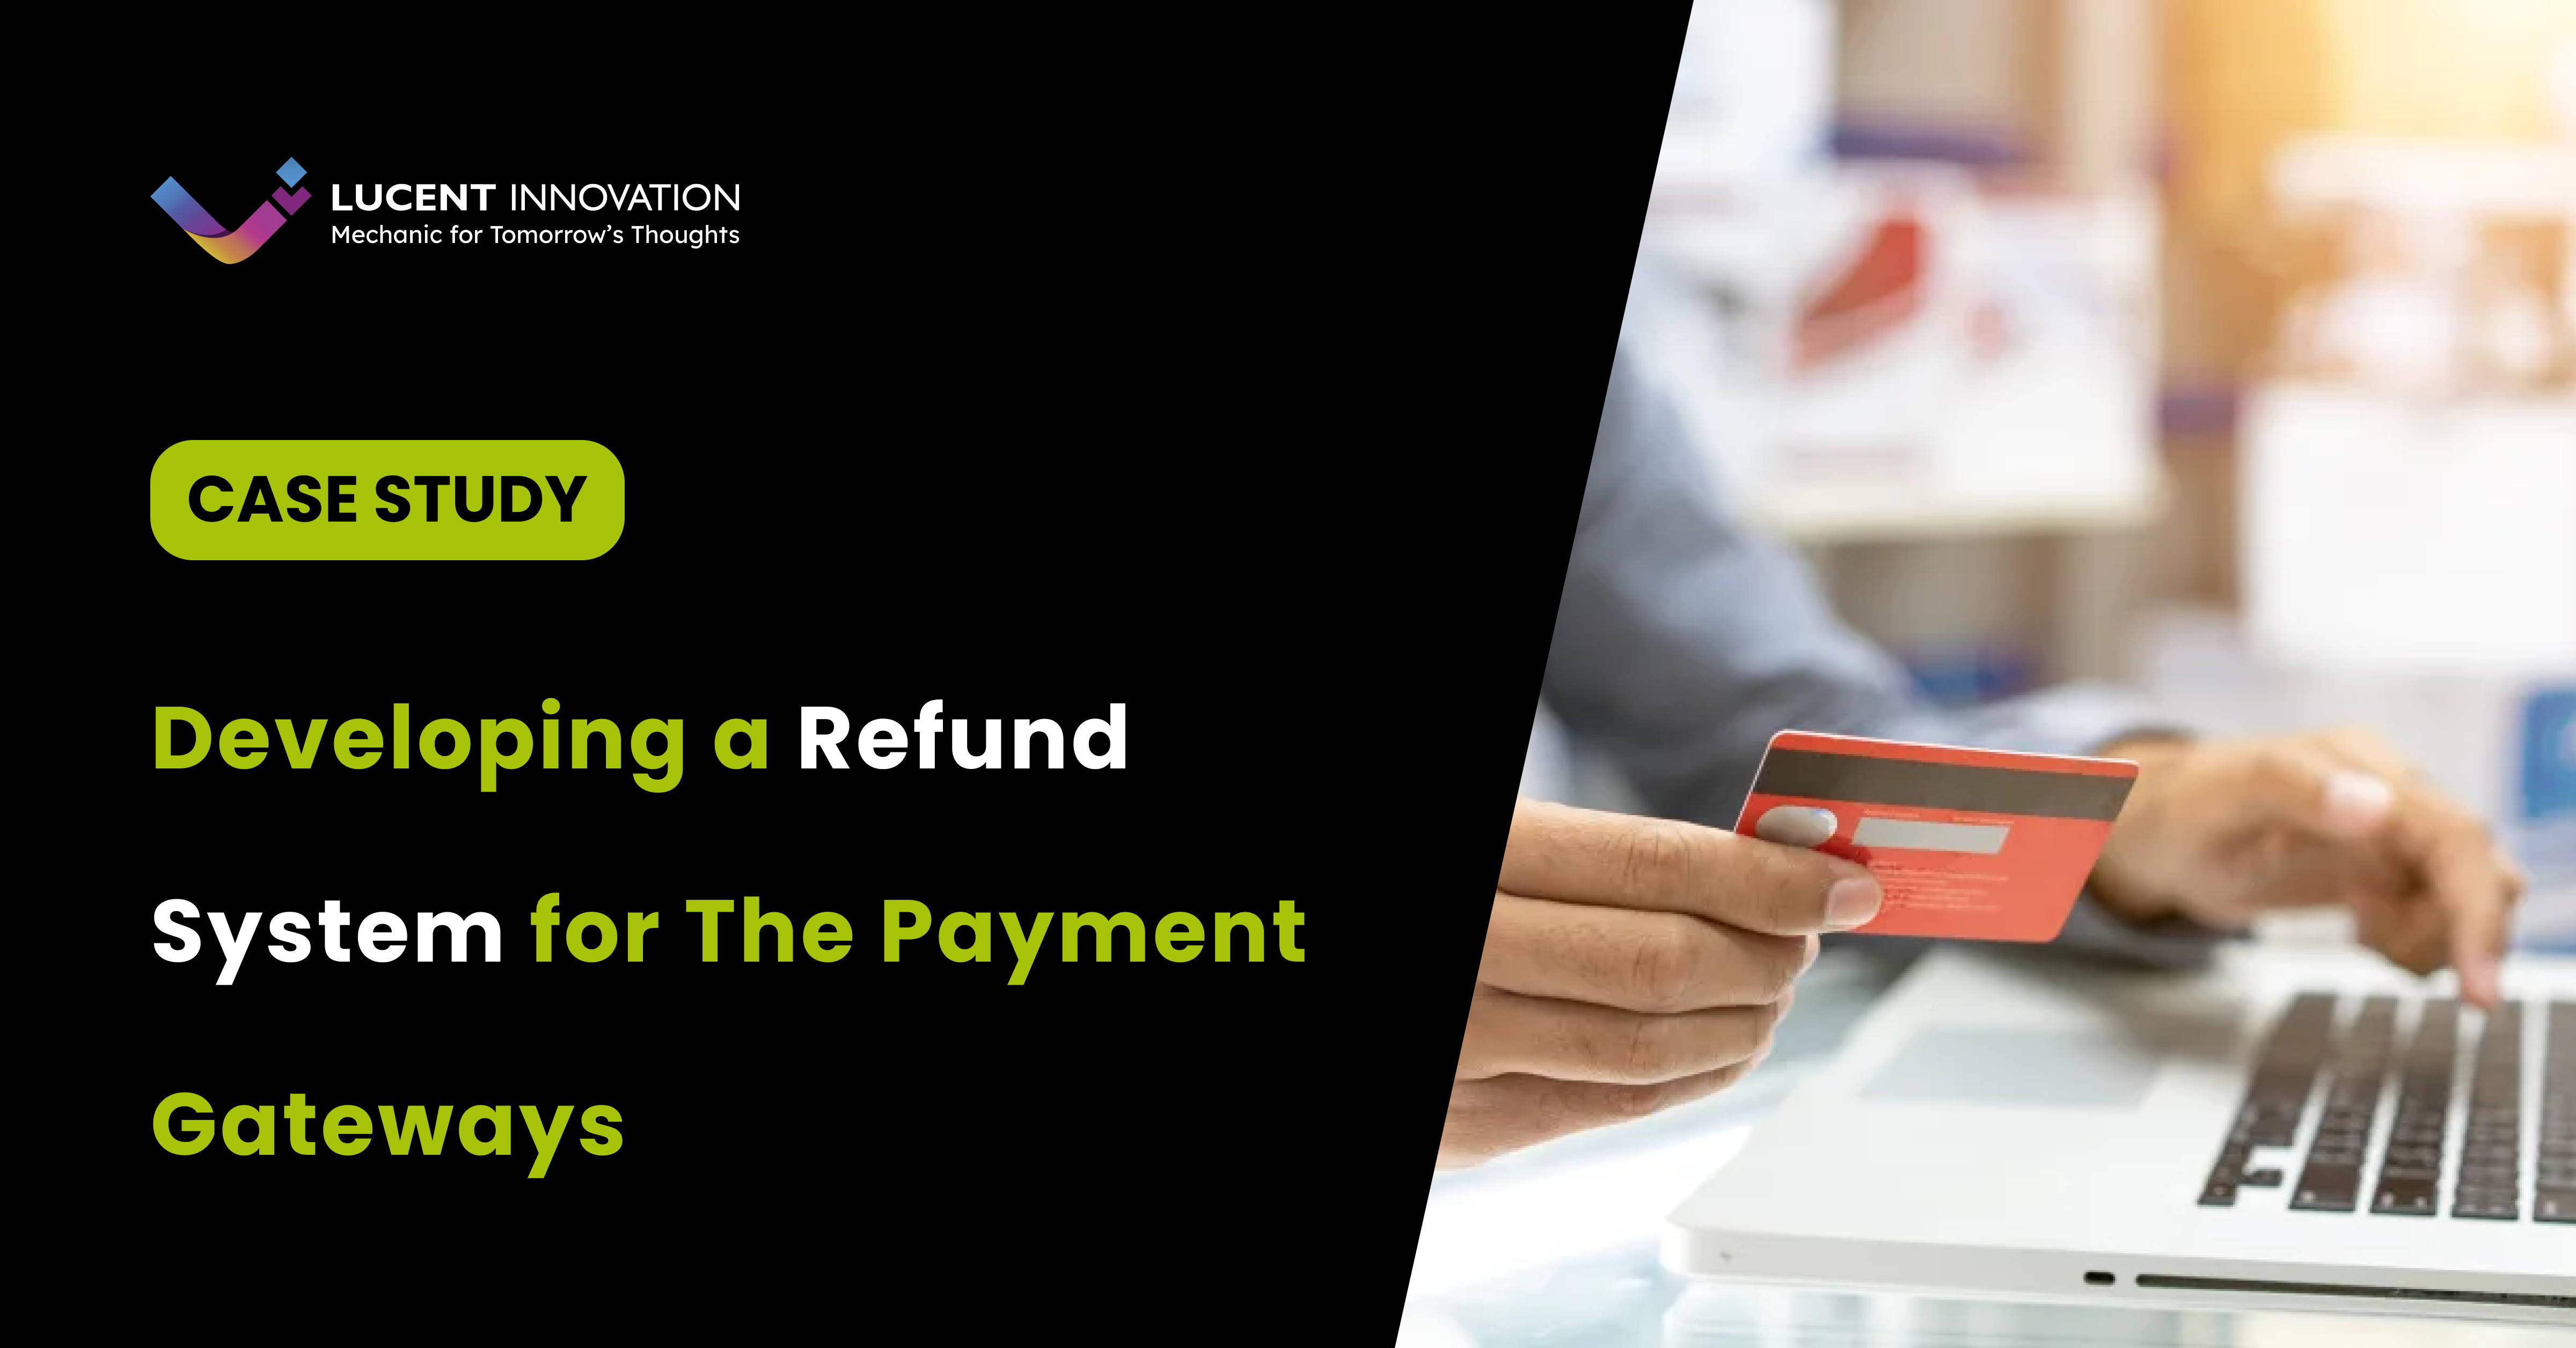 Developing a Refund System for a Popular Payment Service Provider